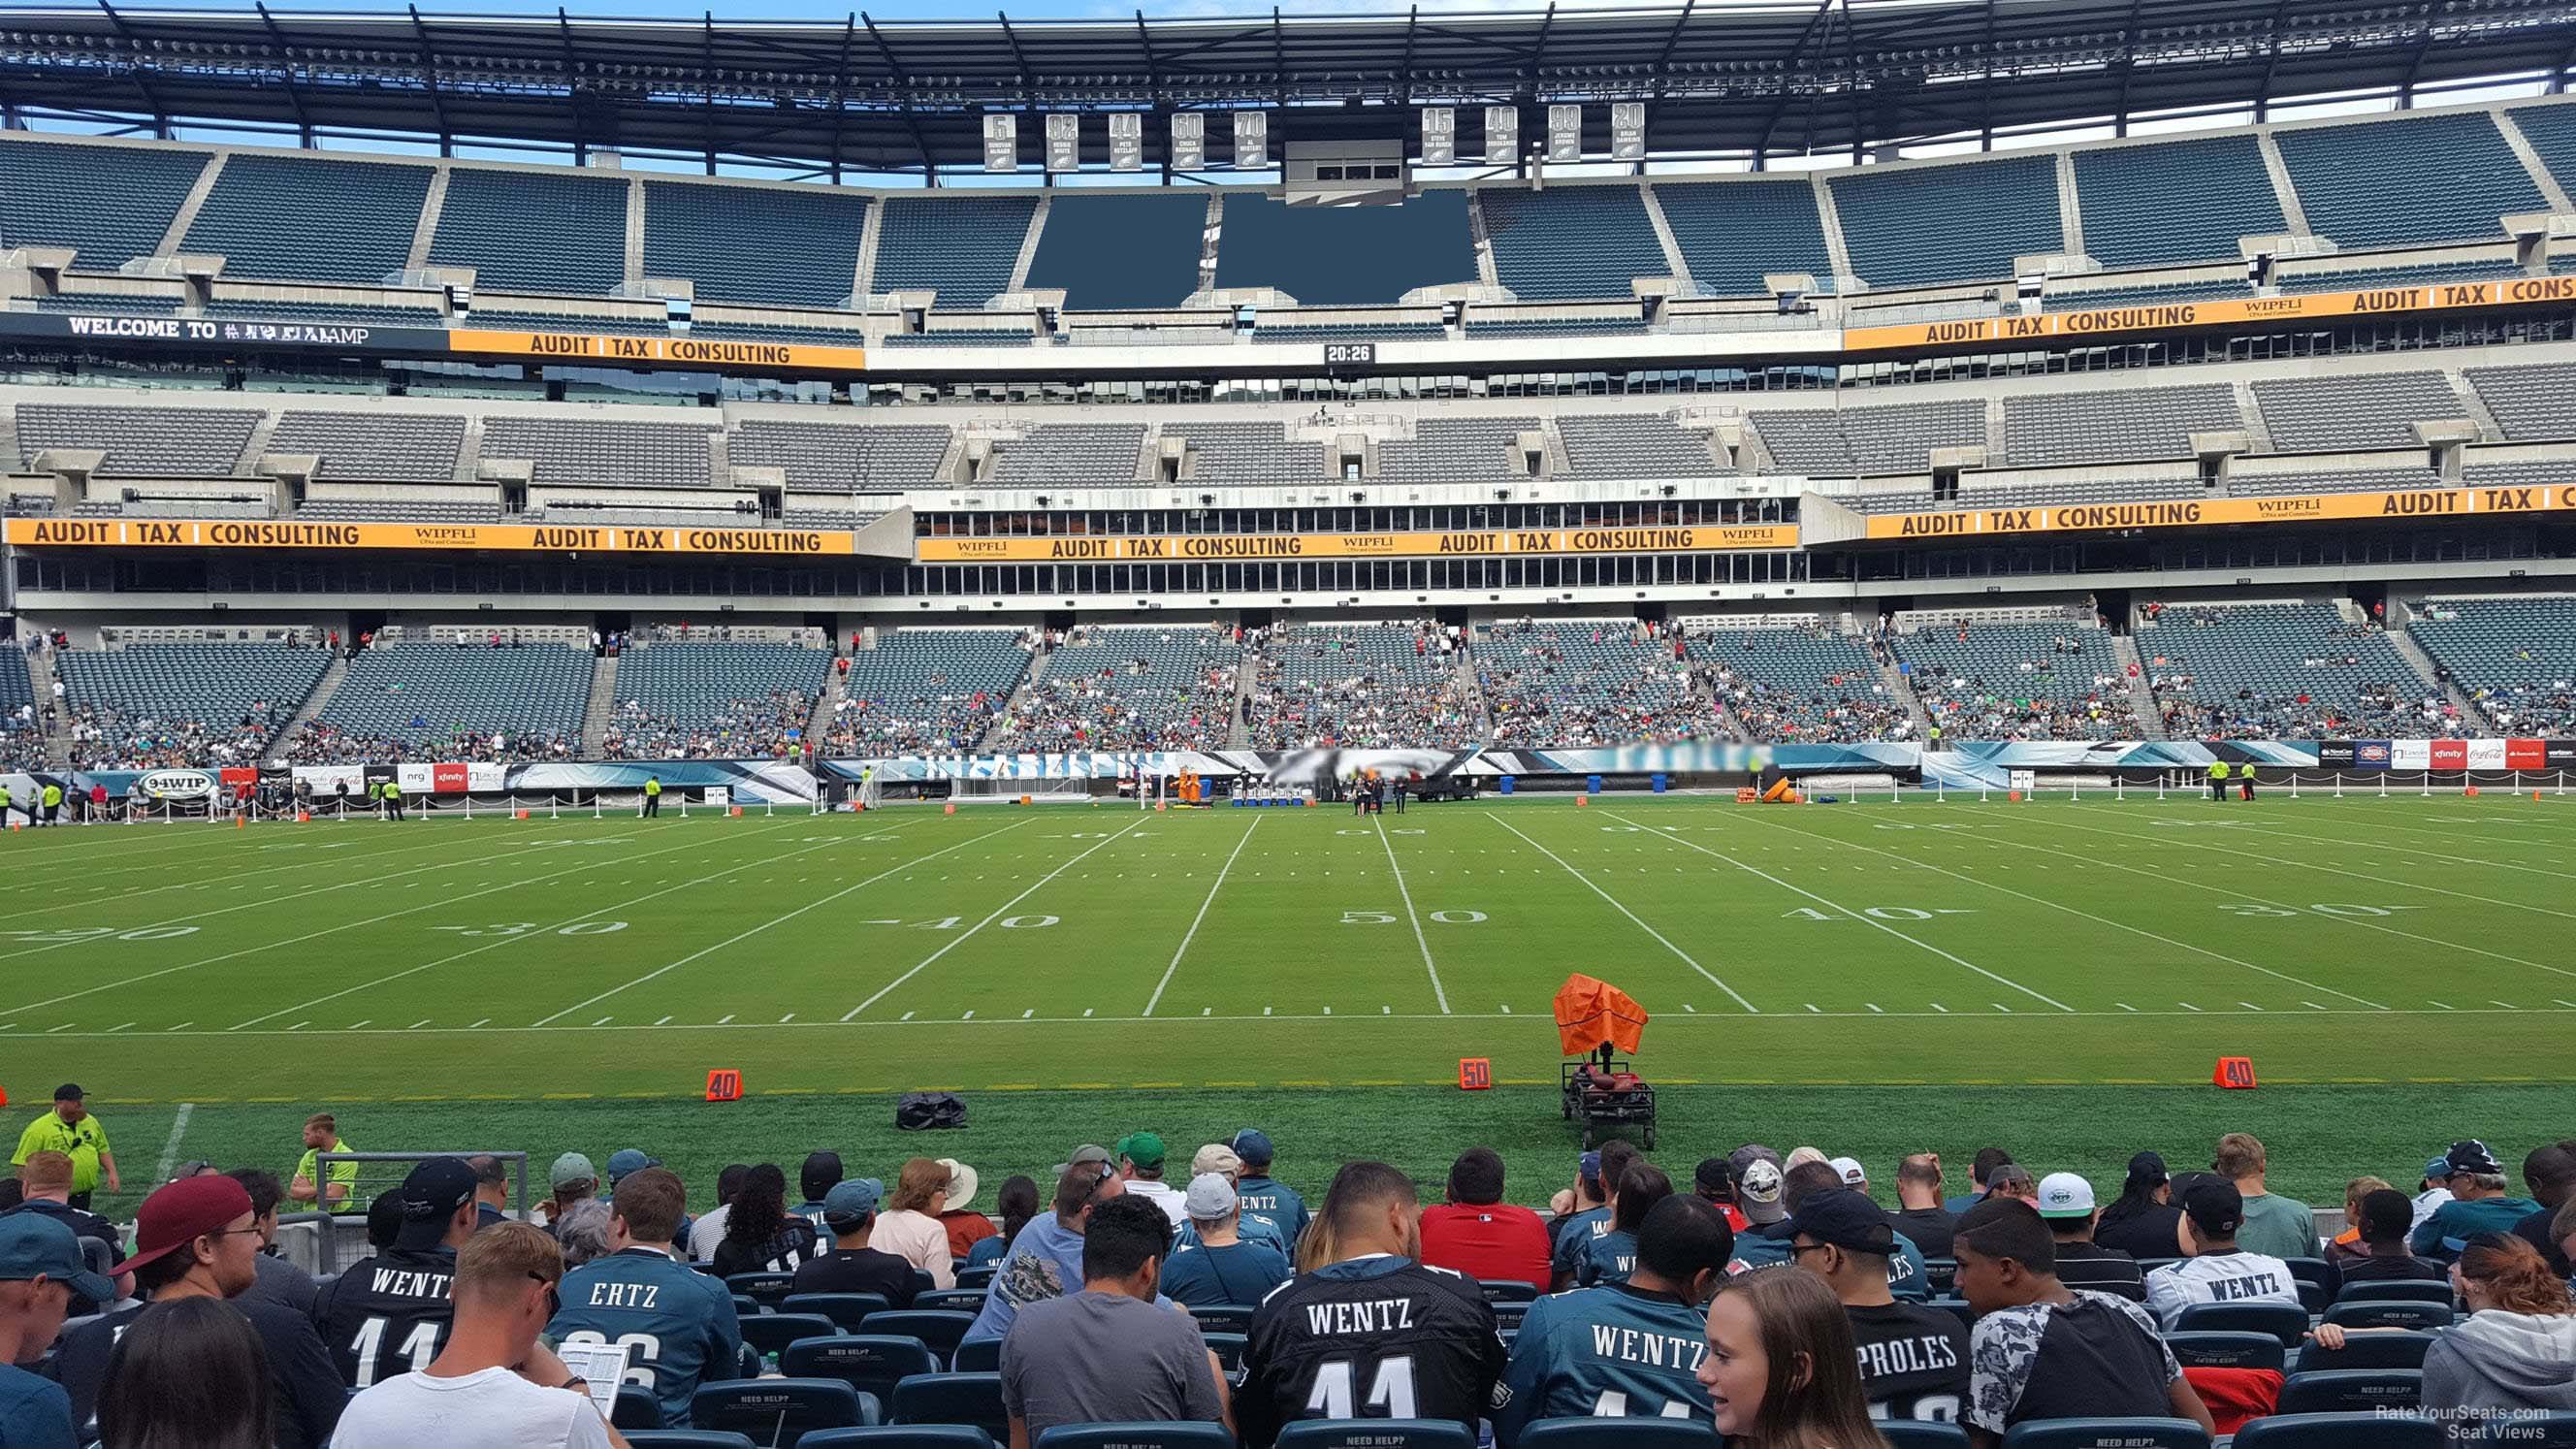 Section 120 at Lincoln Financial Field 